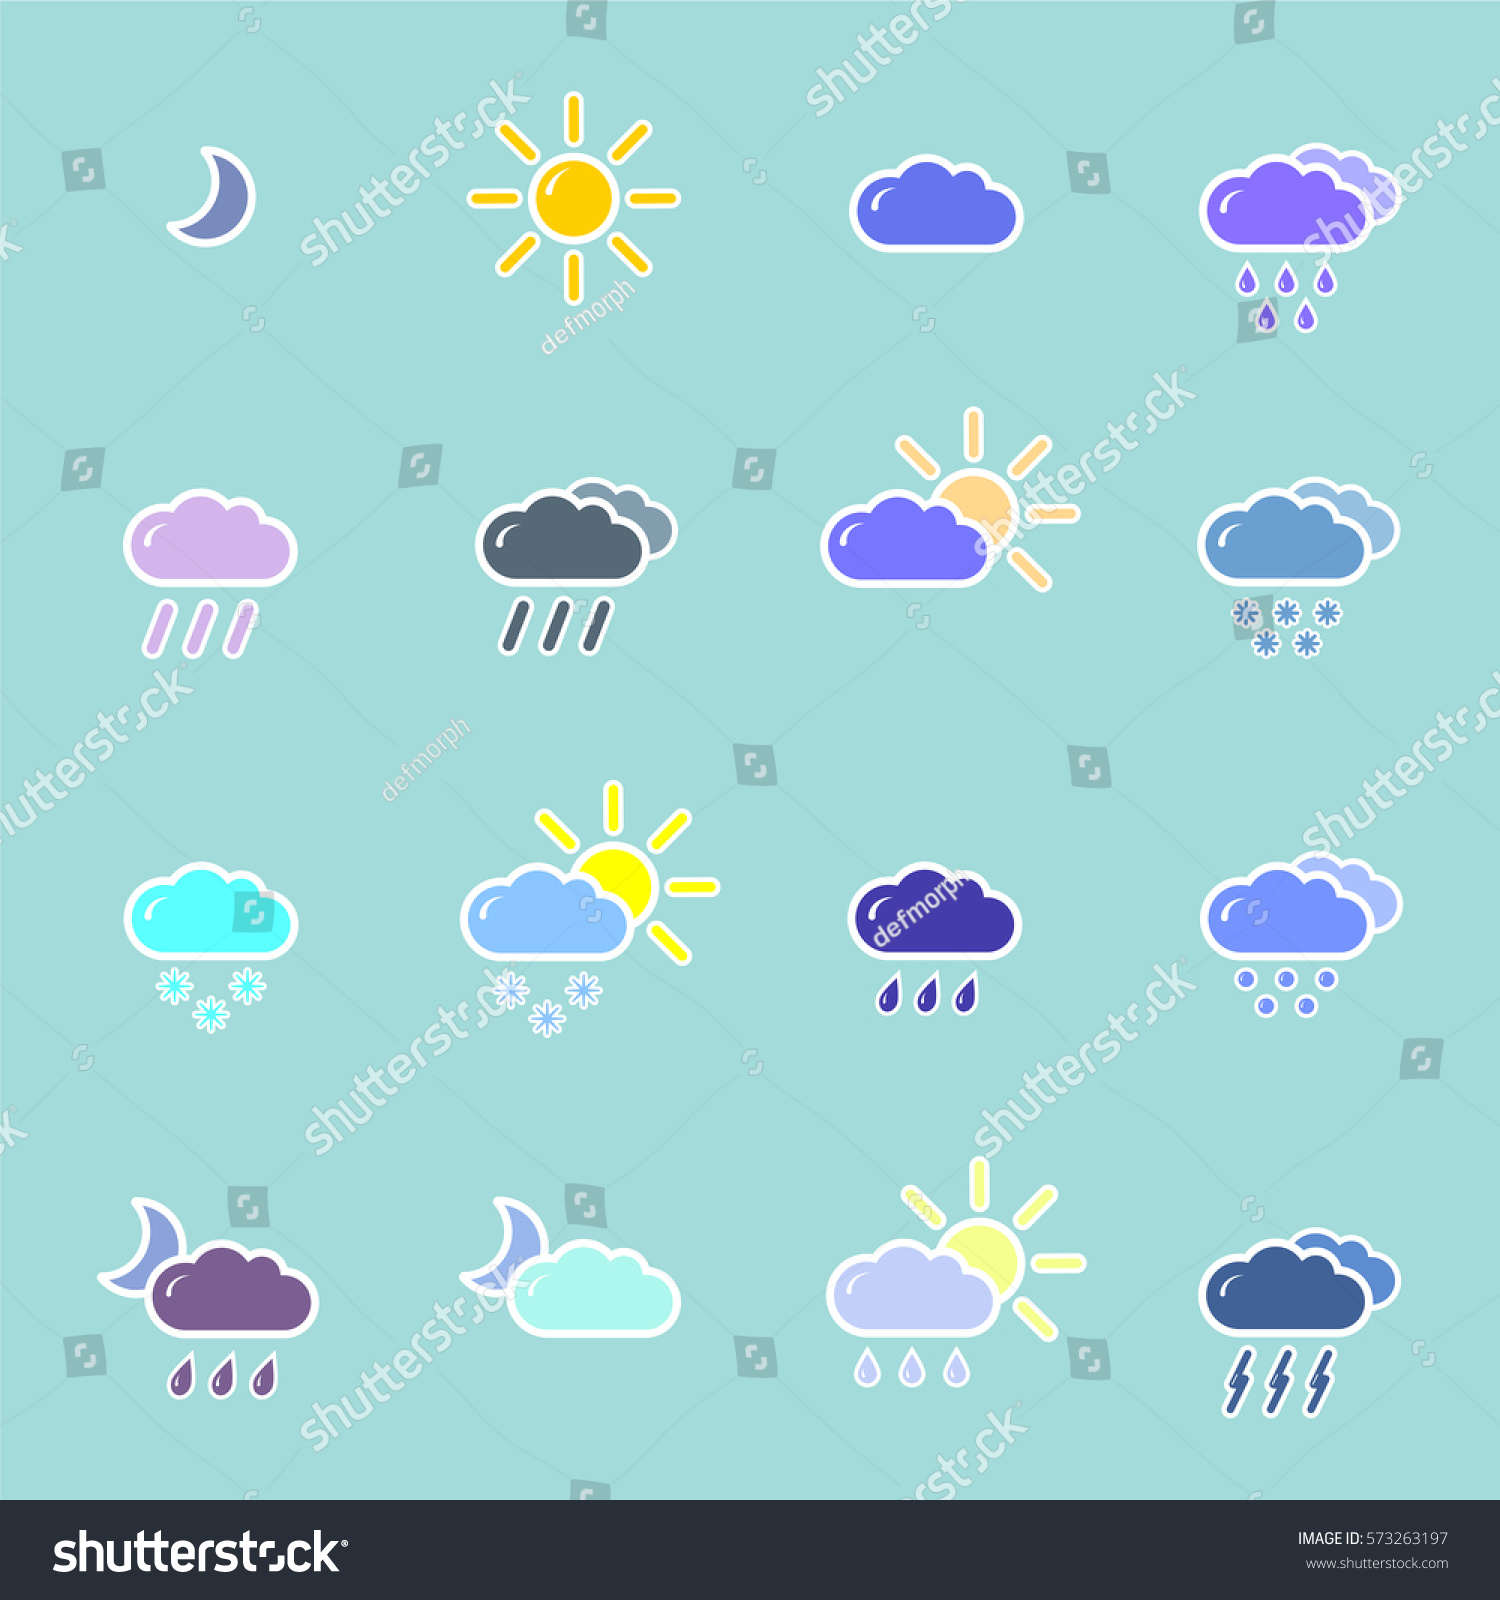 set with different weather icons #573263197